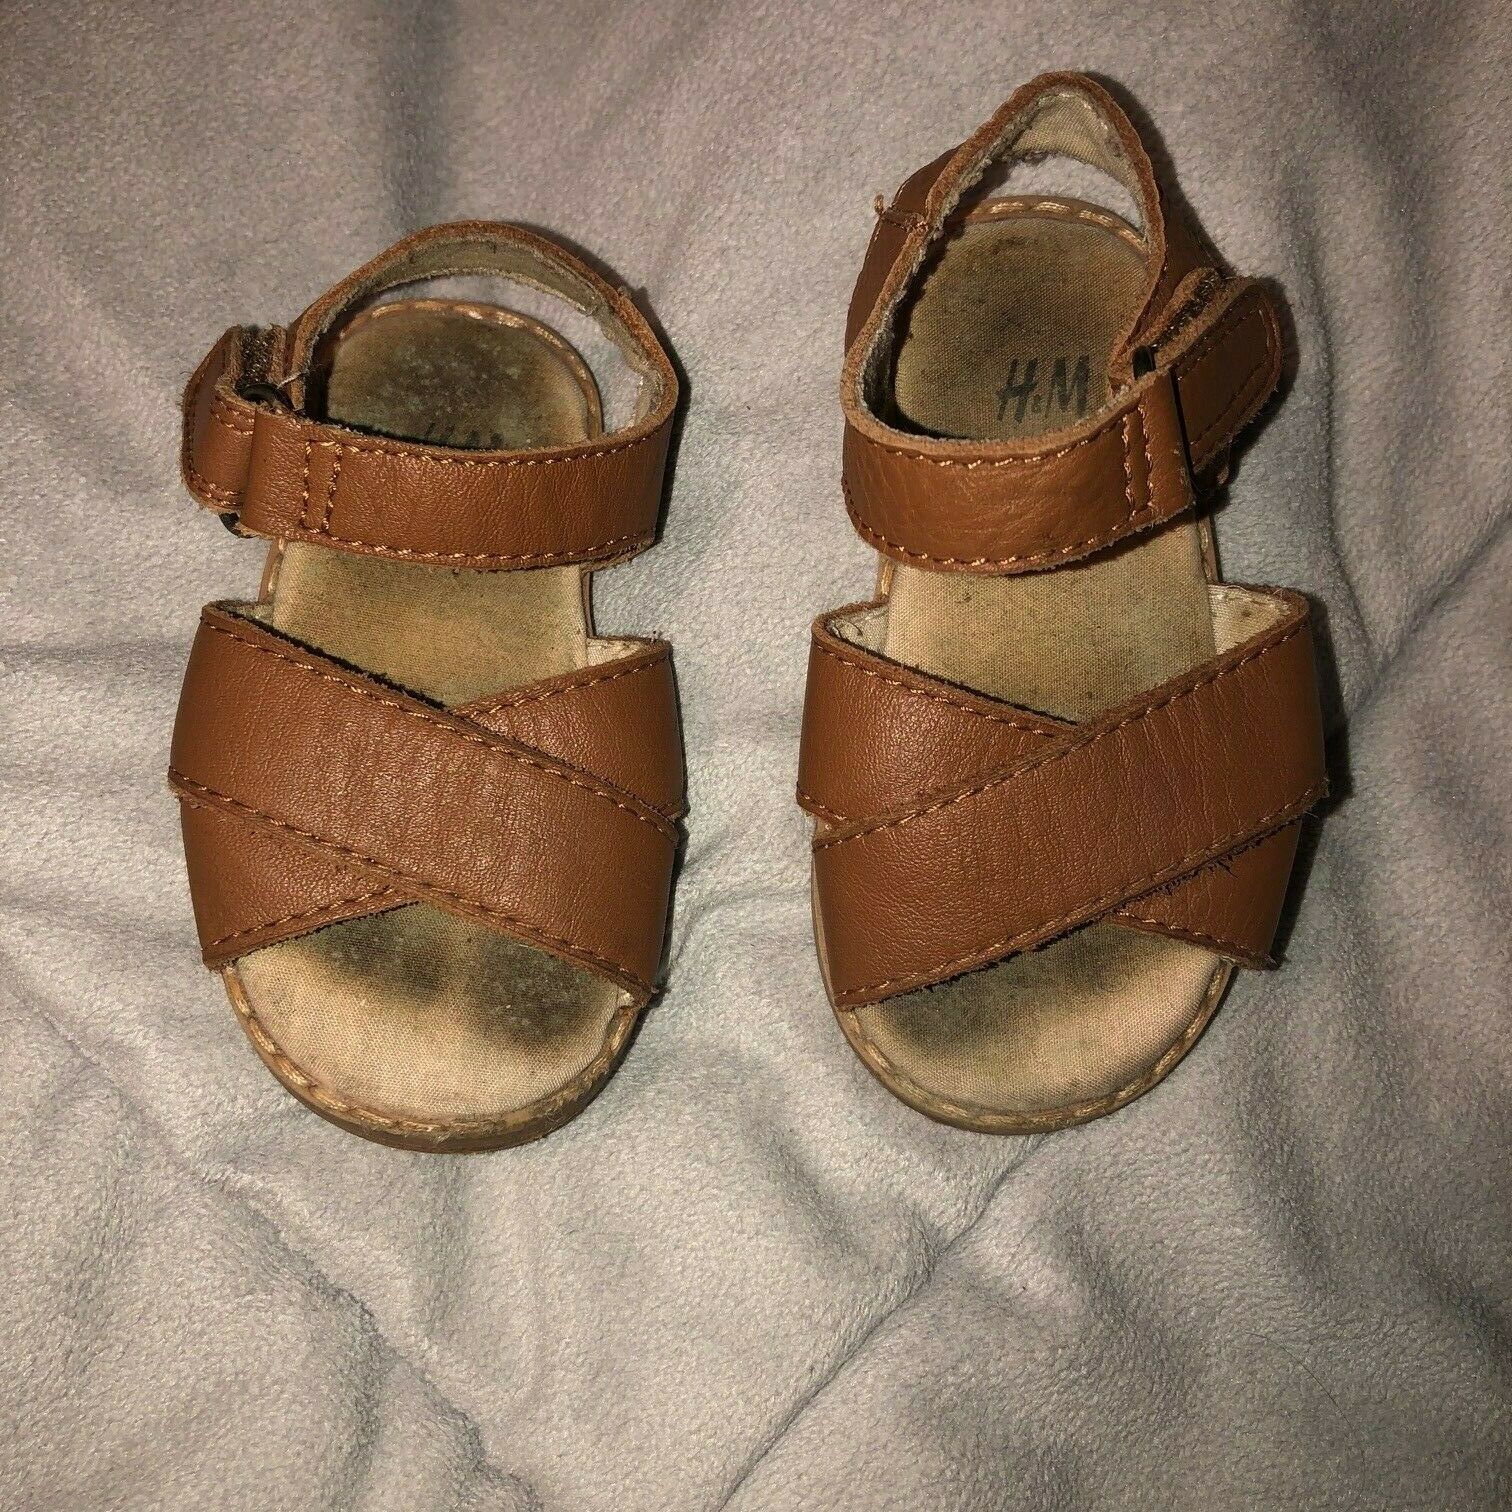 Primary image for H&M Baby Girl’s Sz 2.5-3.5 Sandals with Straps Hook and Loop Closure